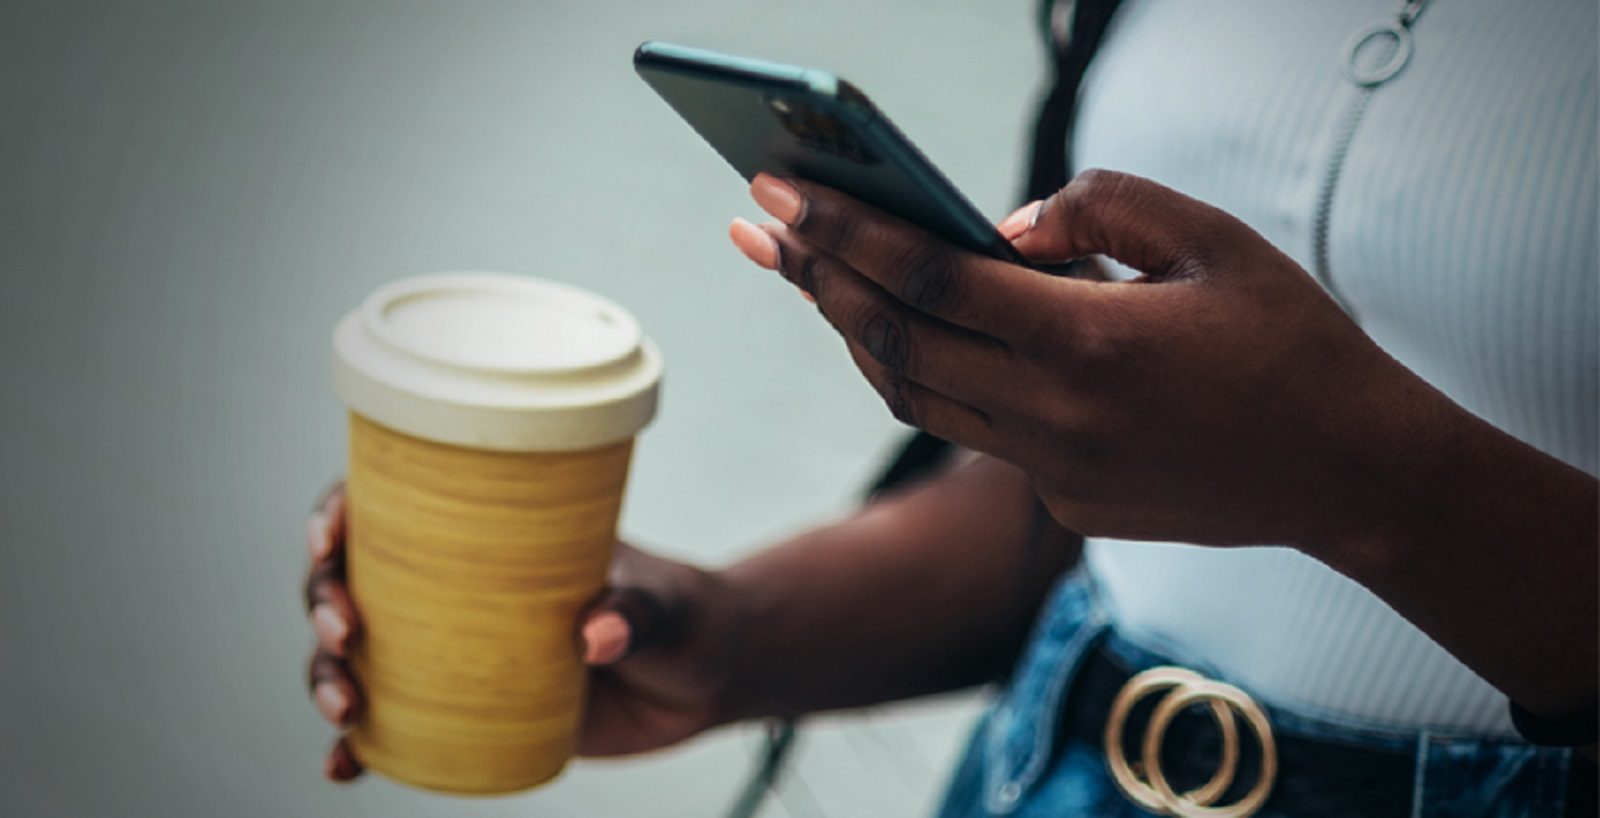 close up of woman's hands holding a mobile phone in left hand and takeaway coffee in right